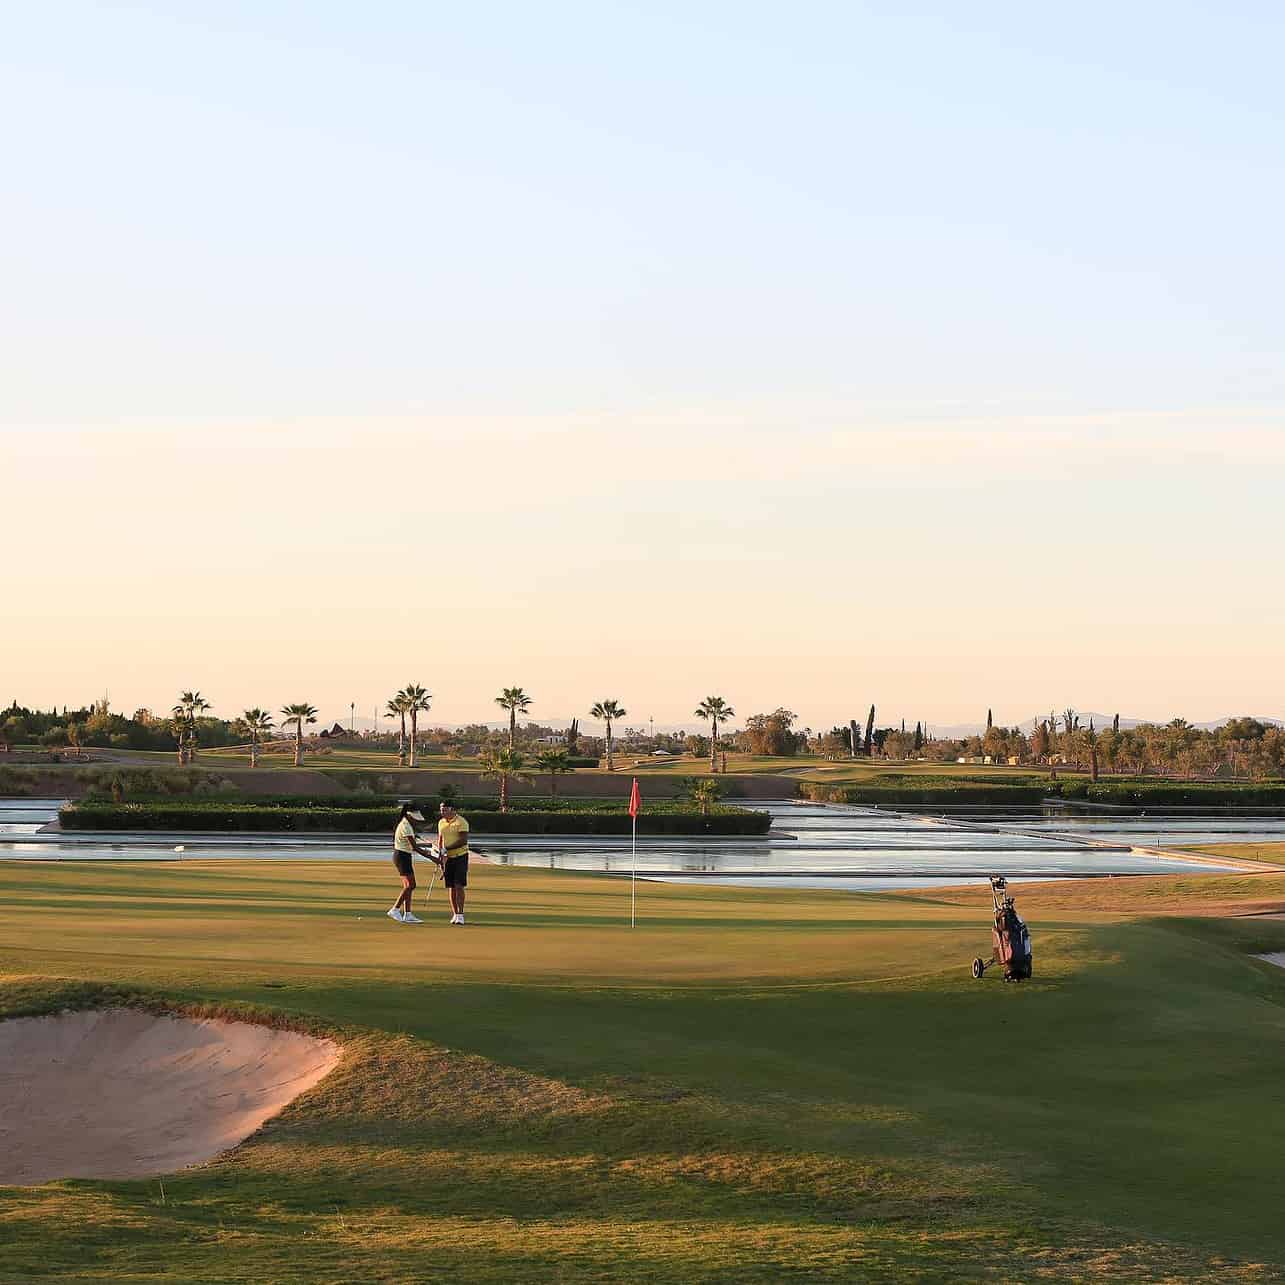 End of the day on the green of the 17th hole at the Al Maaden Golf Marrakech in Morocco.